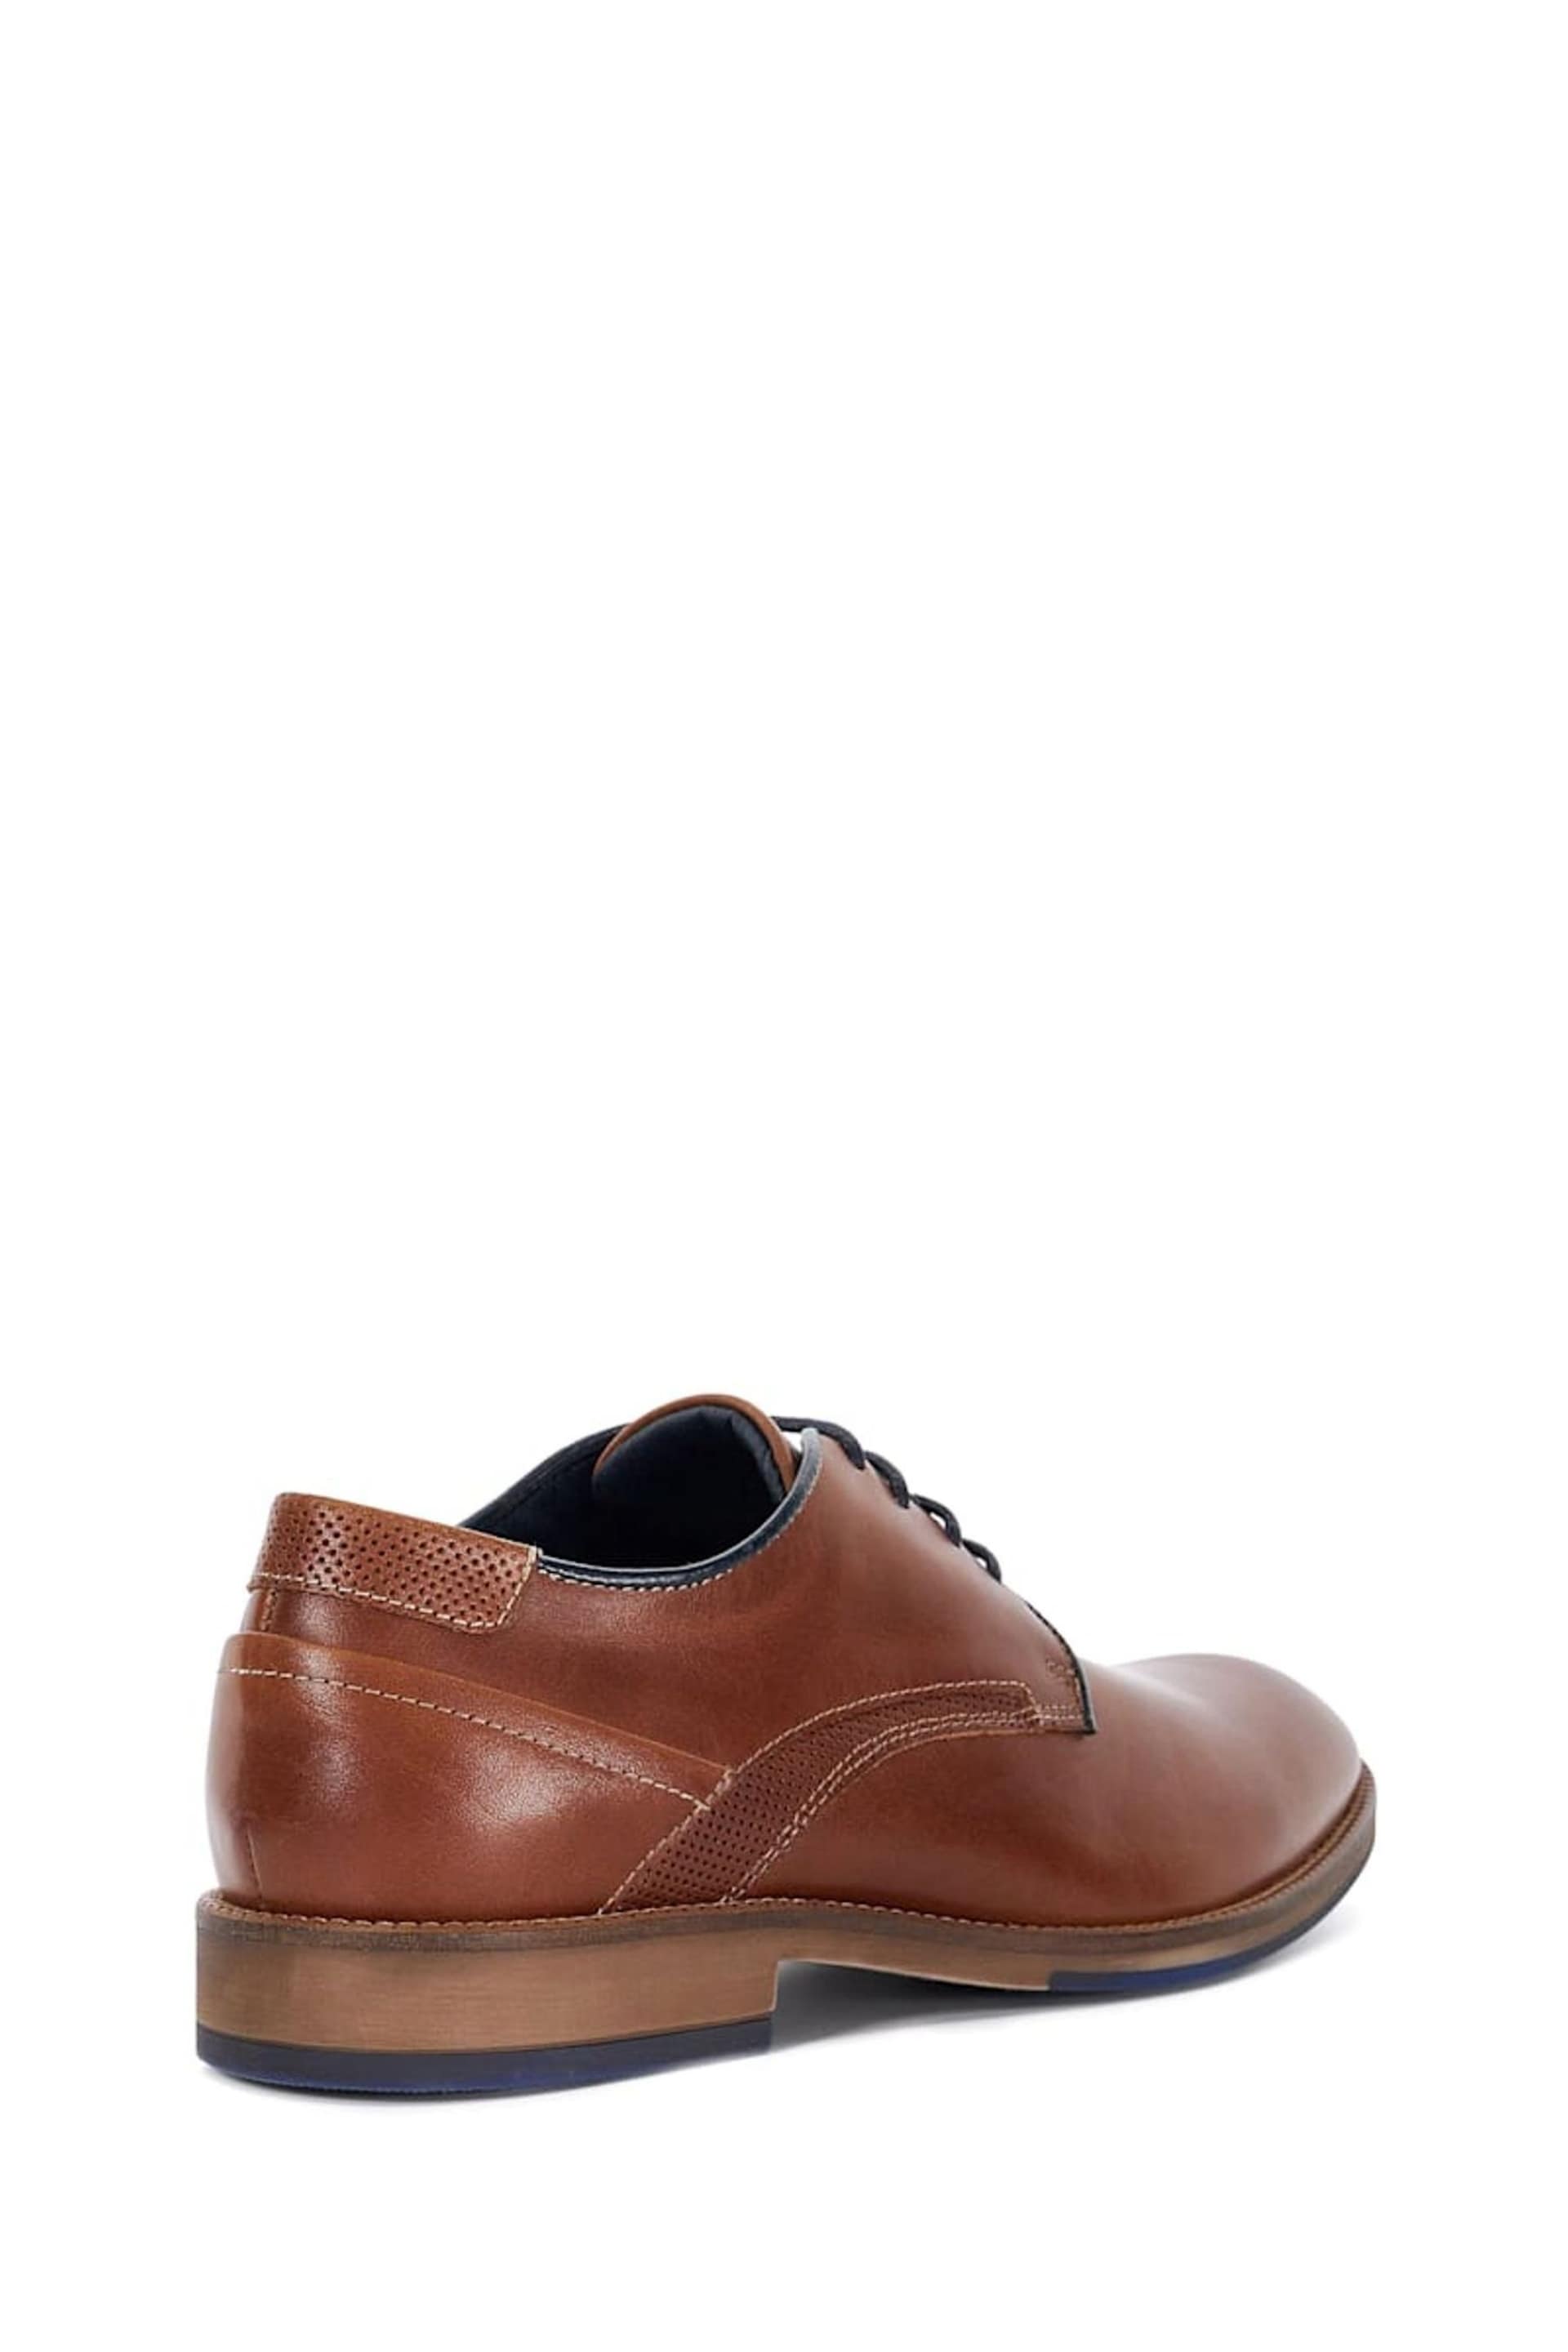 Dune London Brown Bridon Piped Gibson Casual Shoes - Image 3 of 5